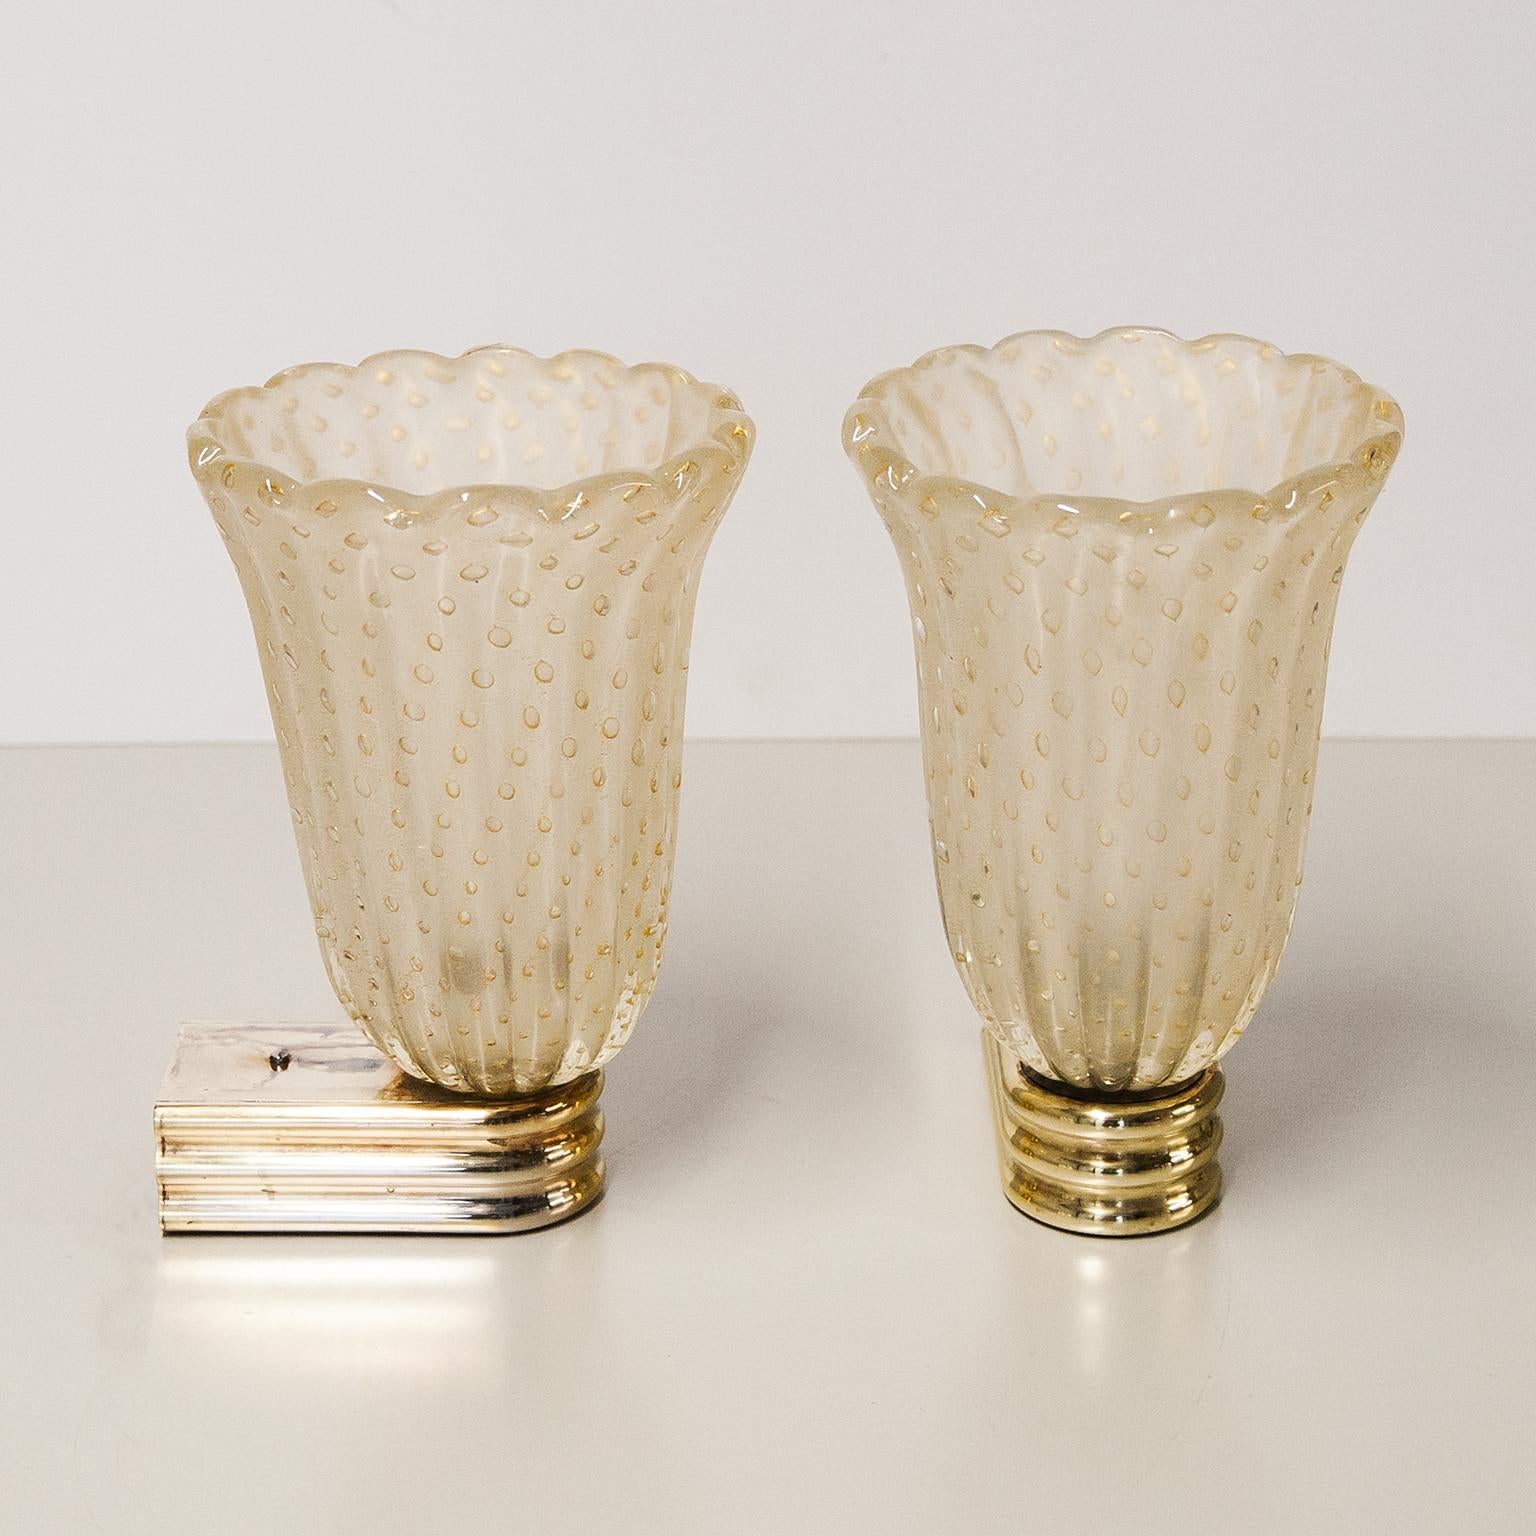 Mid-20th Century Ercole Barovier Art Deco Pulegoso Sconces 1930 Set of Two For Sale